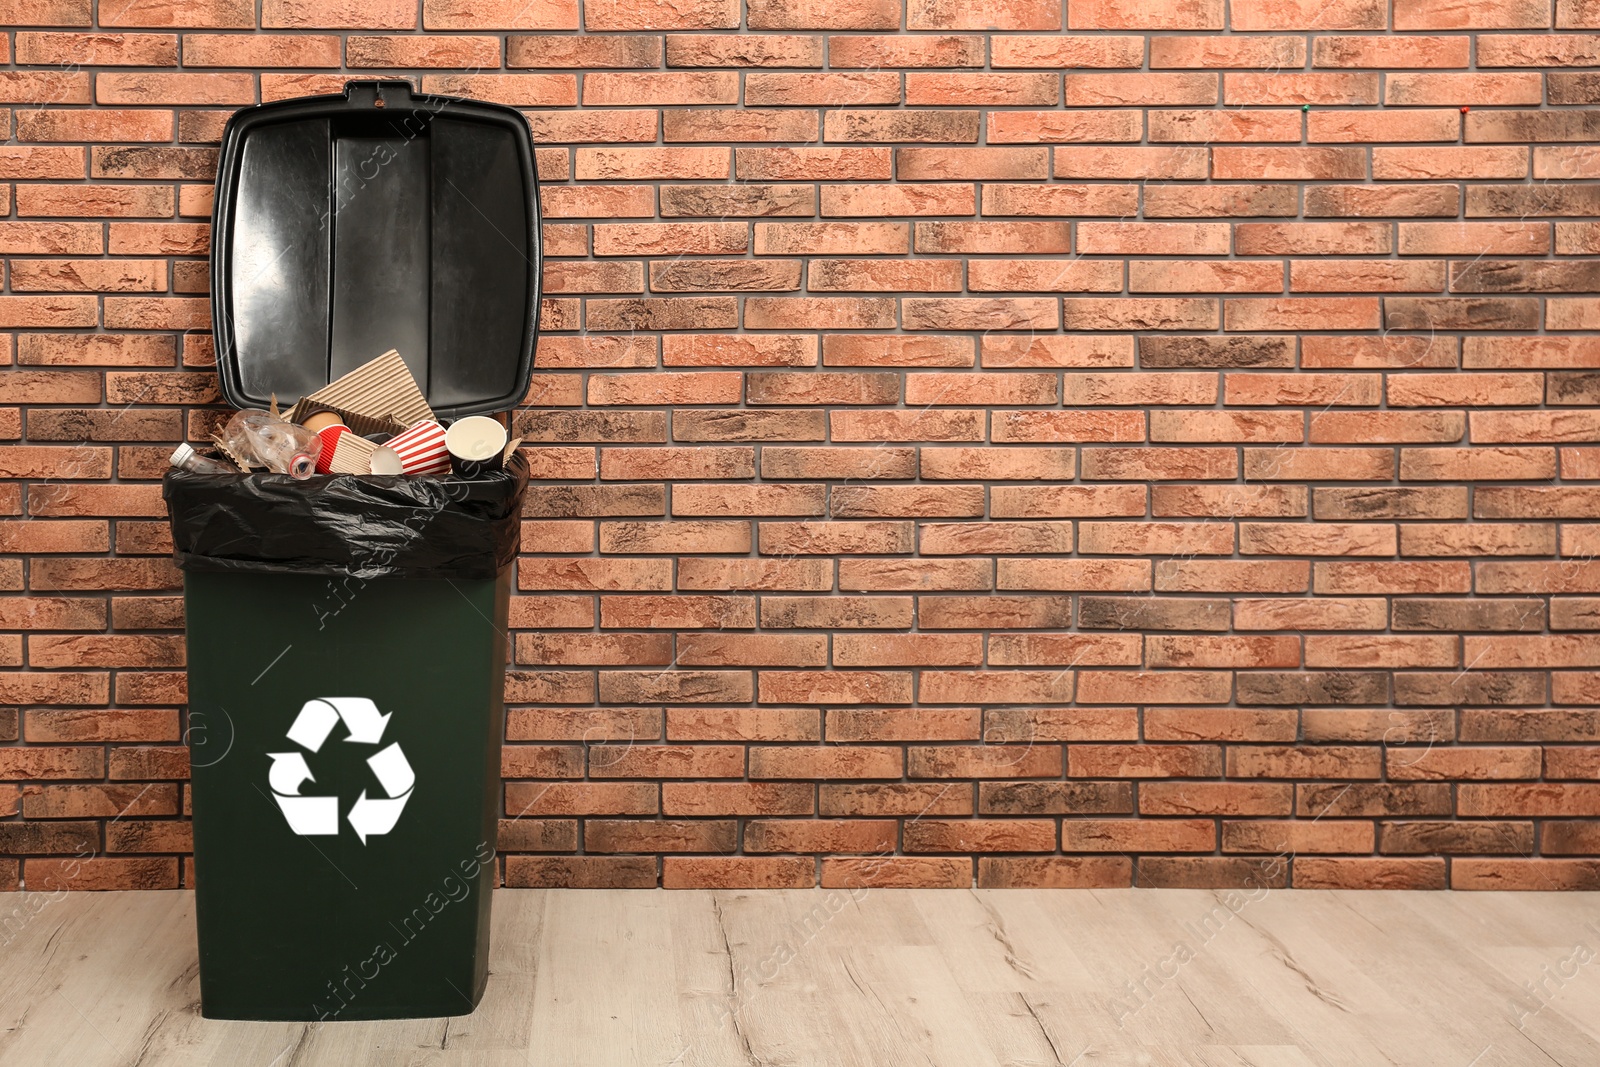 Photo of Full trash bin near brick wall indoors, space for text. Waste recycling